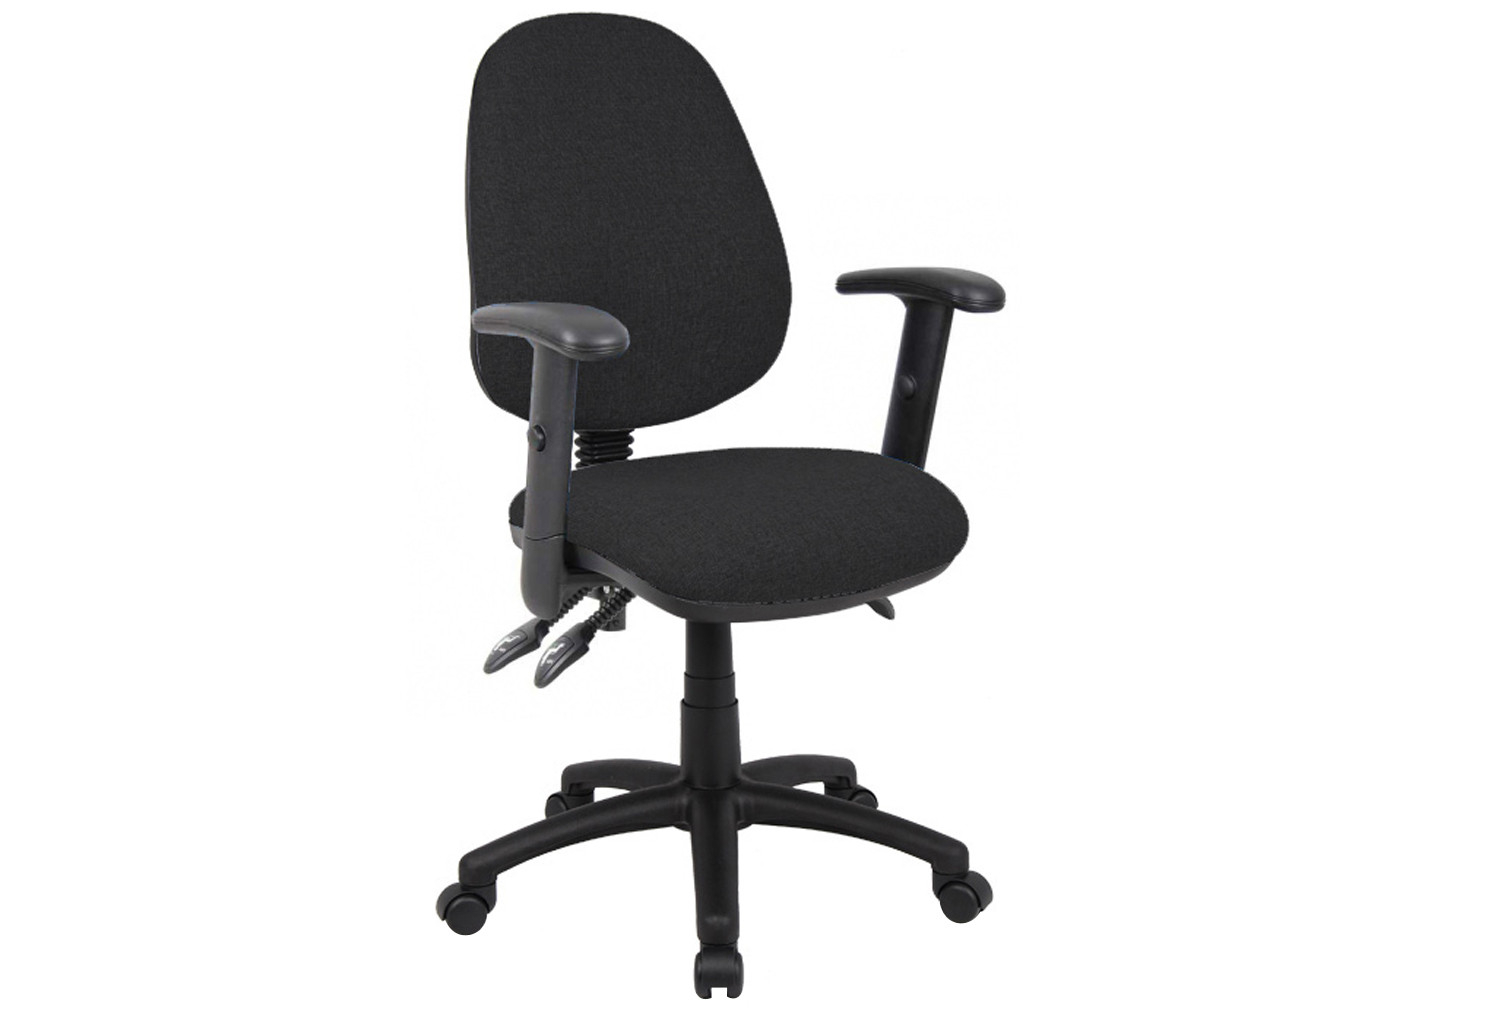 All Black 3 Lever Fabric Operator Office Chair With Adjustable Arms, Fully Installed